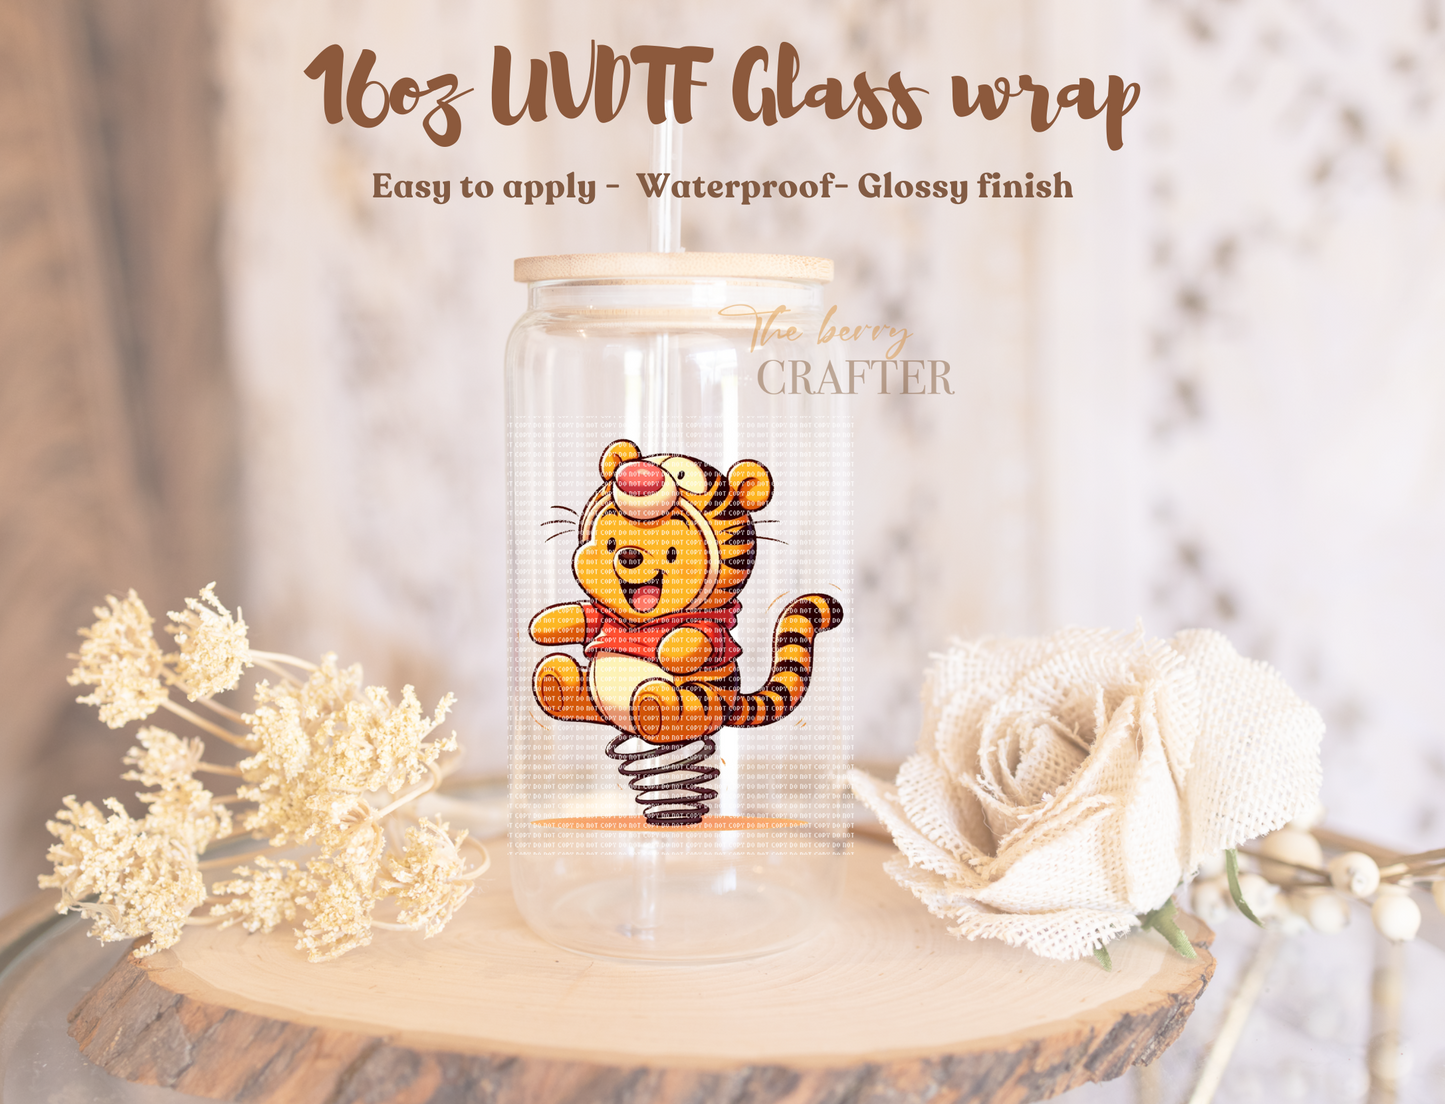 #1031 Decal Pooh is Tiger UVDTF Wrap